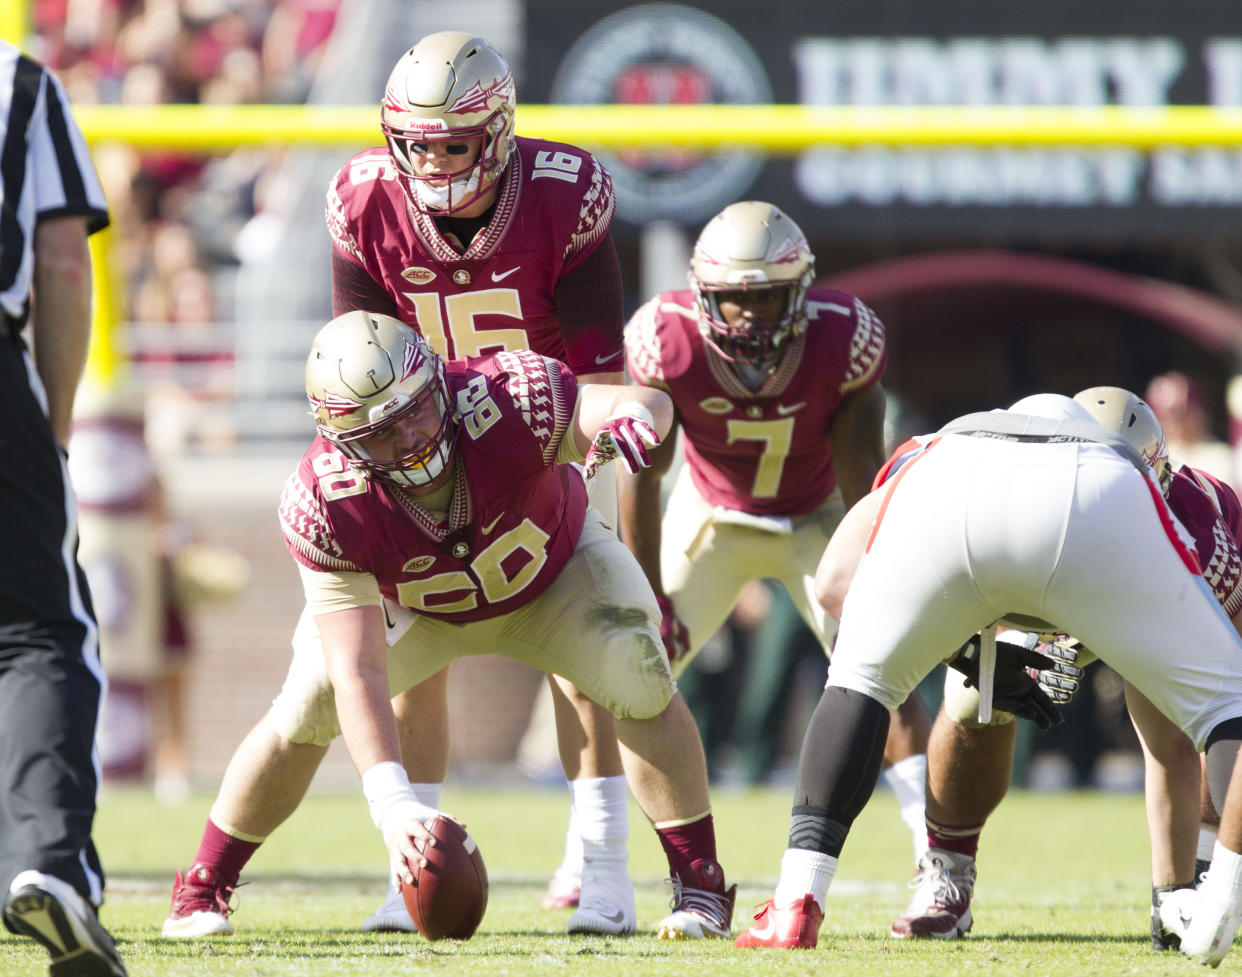 TALLAHASSEE, FL - NOVEMBER 18: Florida State Seminoles offensive lineman Andrew Boselli (60) calls out protection with Florida State Seminoles quarterback J.J. Cosentino (16) and Florida State Seminoles running back Ryan Green (7) during the game between the Delaware State Hornets and the Florida State Seminoles at Doak Campbell Stadium in Tallahassee, FL on November 18th, 2017. (Photo by Logan Stanford/Icon Sportswire via Getty Images)